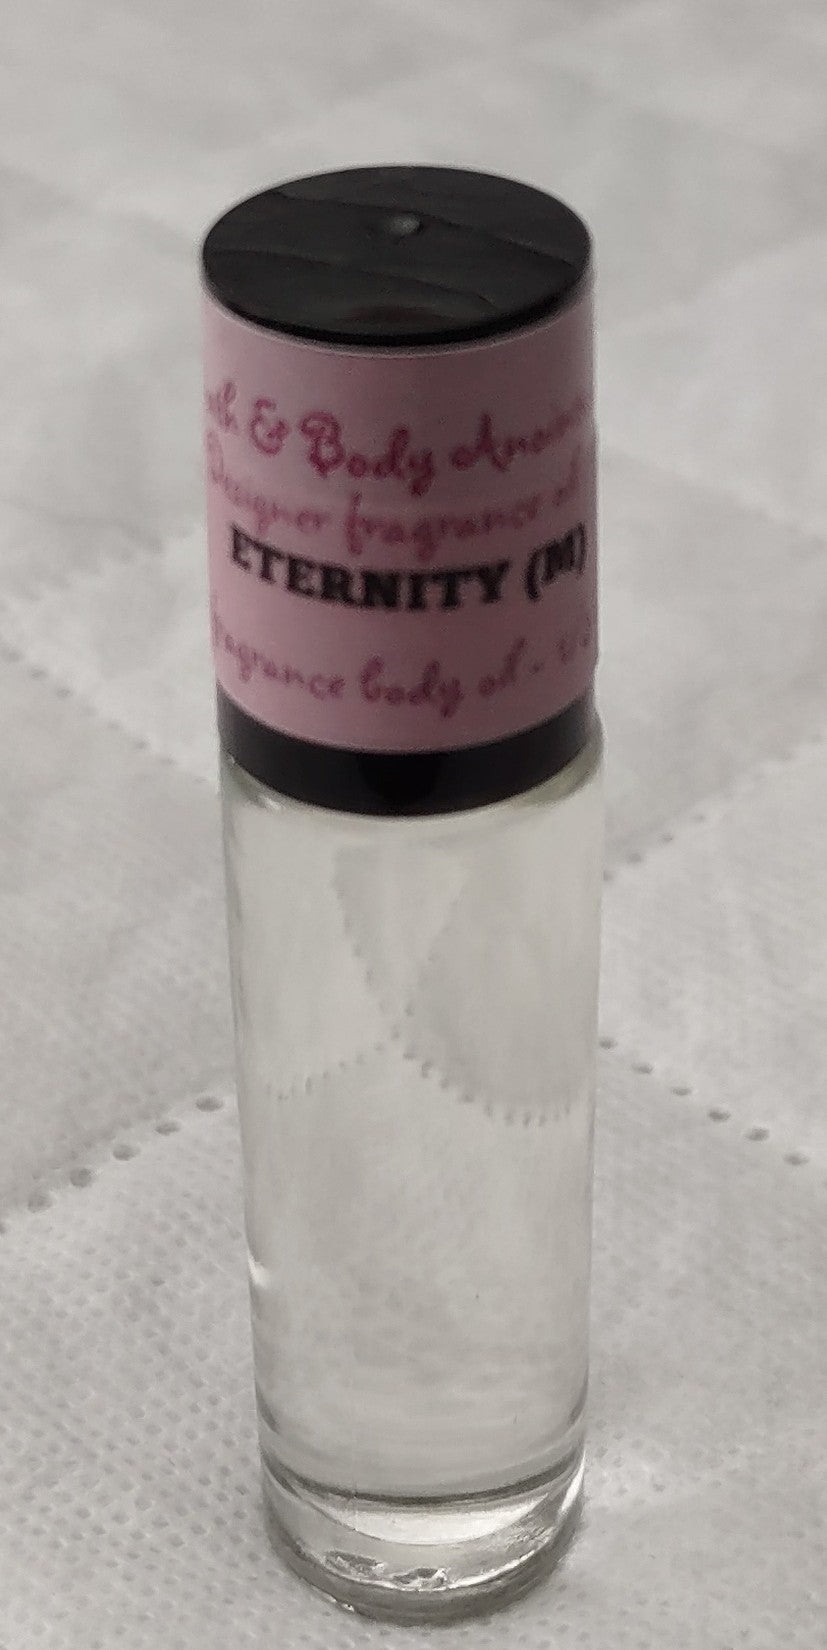 Eternity for men - our impression.